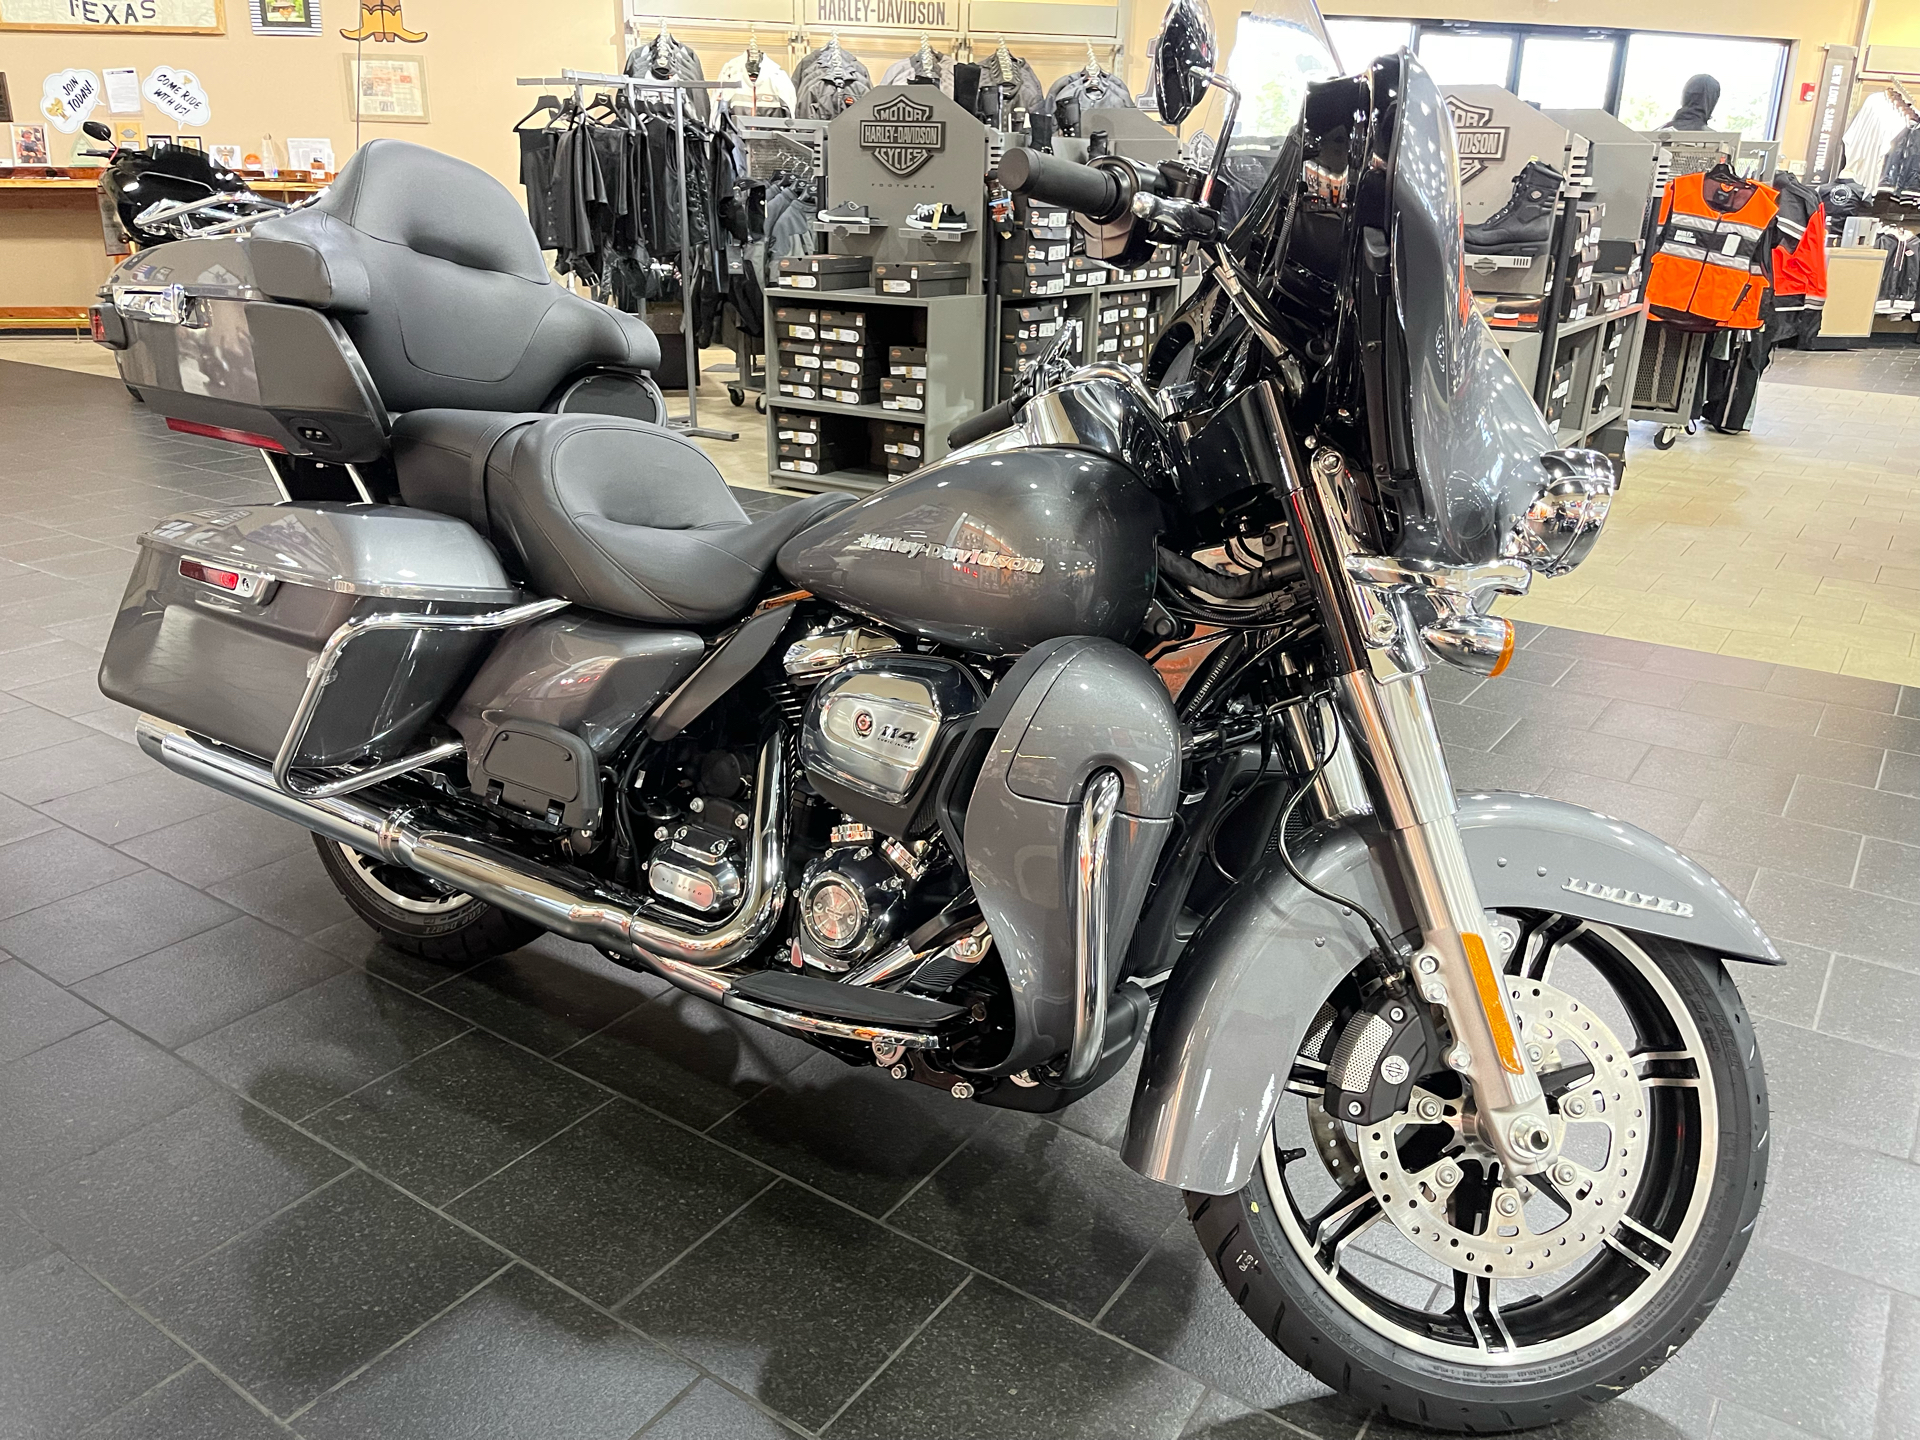 2022 Harley-Davidson Ultra Limited in The Woodlands, Texas - Photo 3